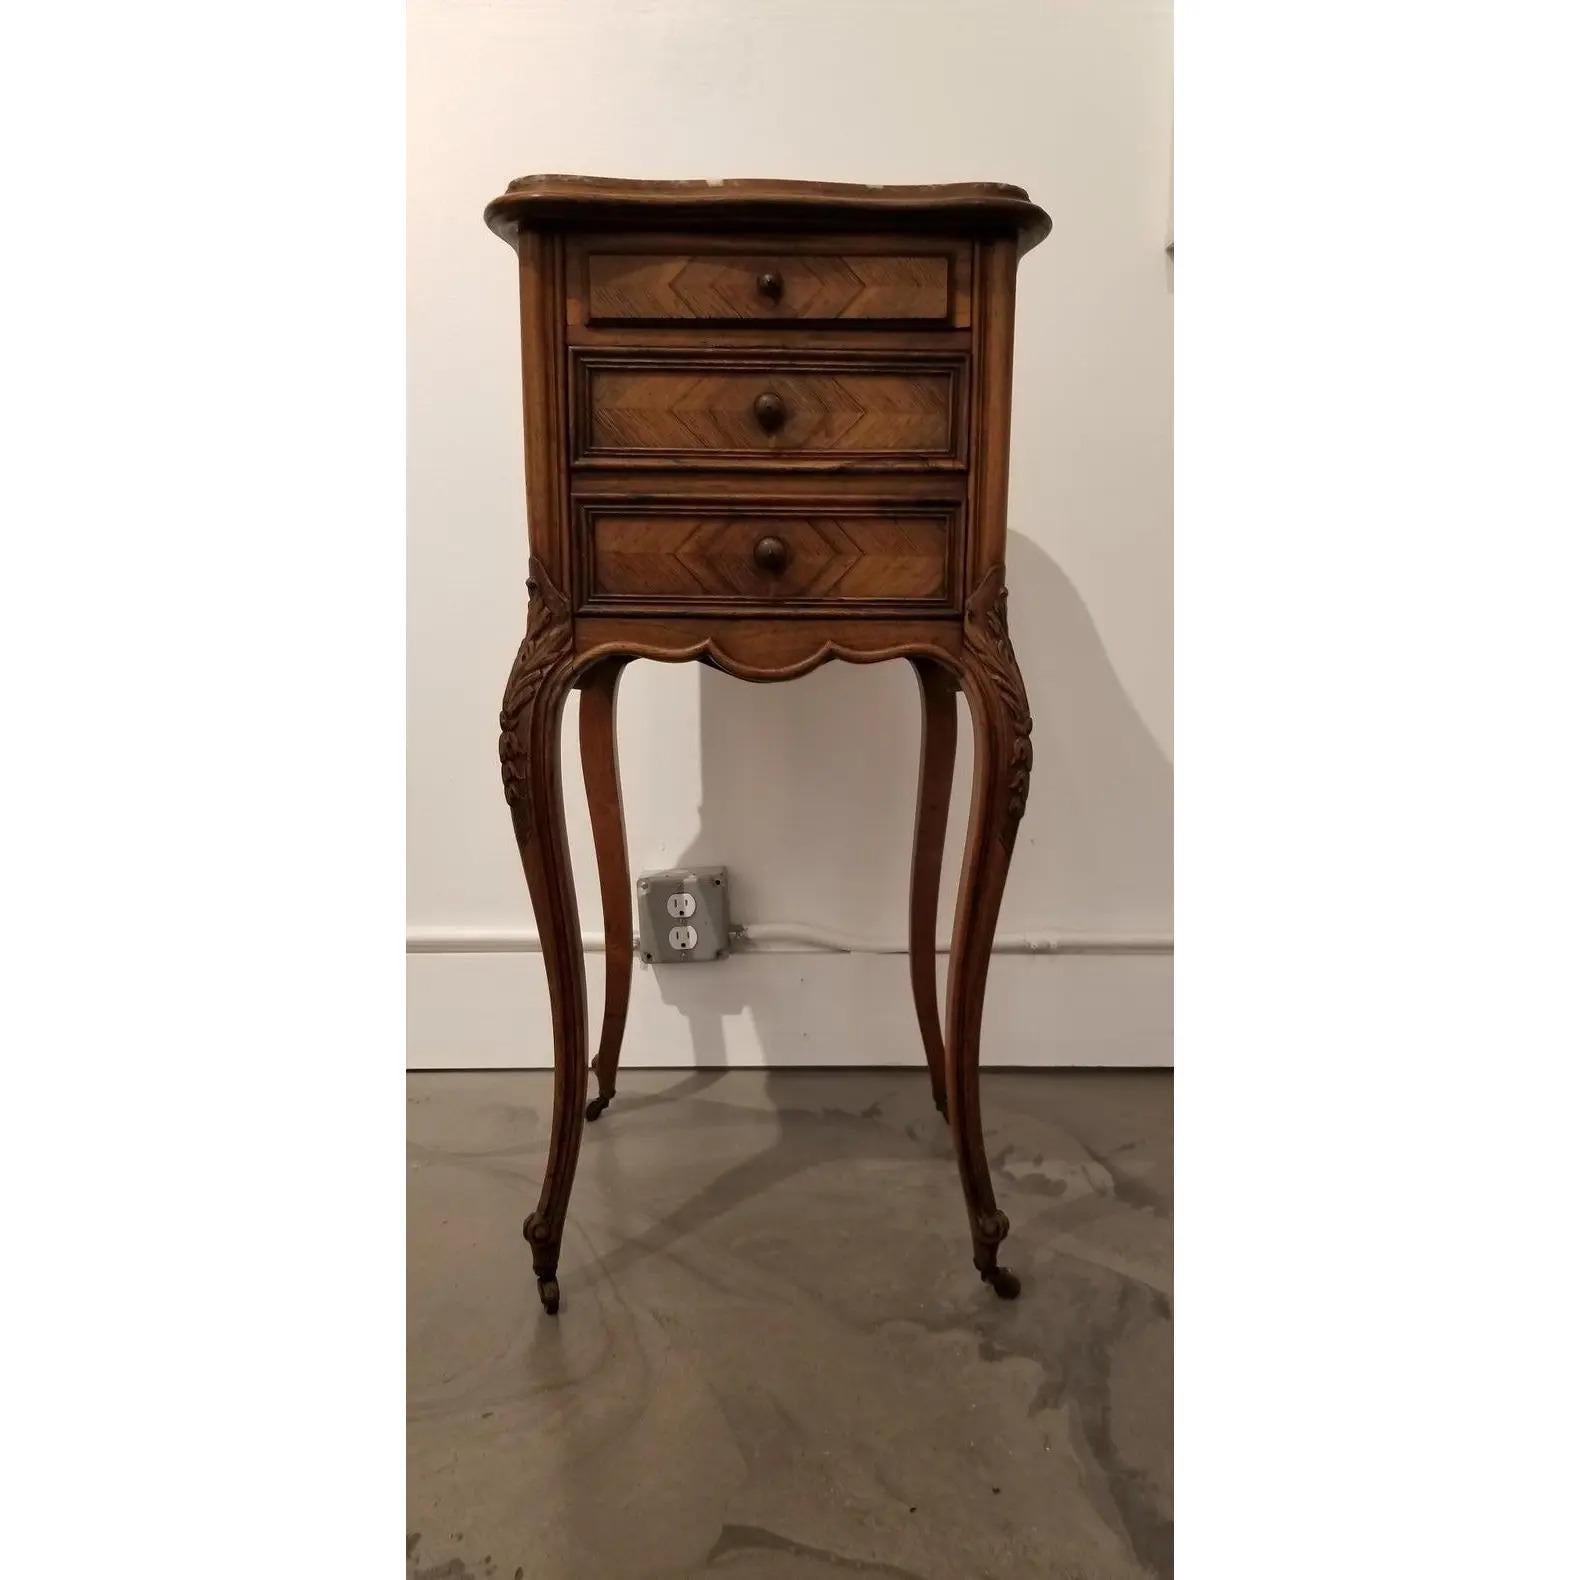 Early 20th century French rosewood and marble bedside or end table. Cabriole legs crafted in solid rosewood with book-matched rosewood sides, drawer faces and back. Sculpted top with original curved marble inset top with bevel. Marble interior